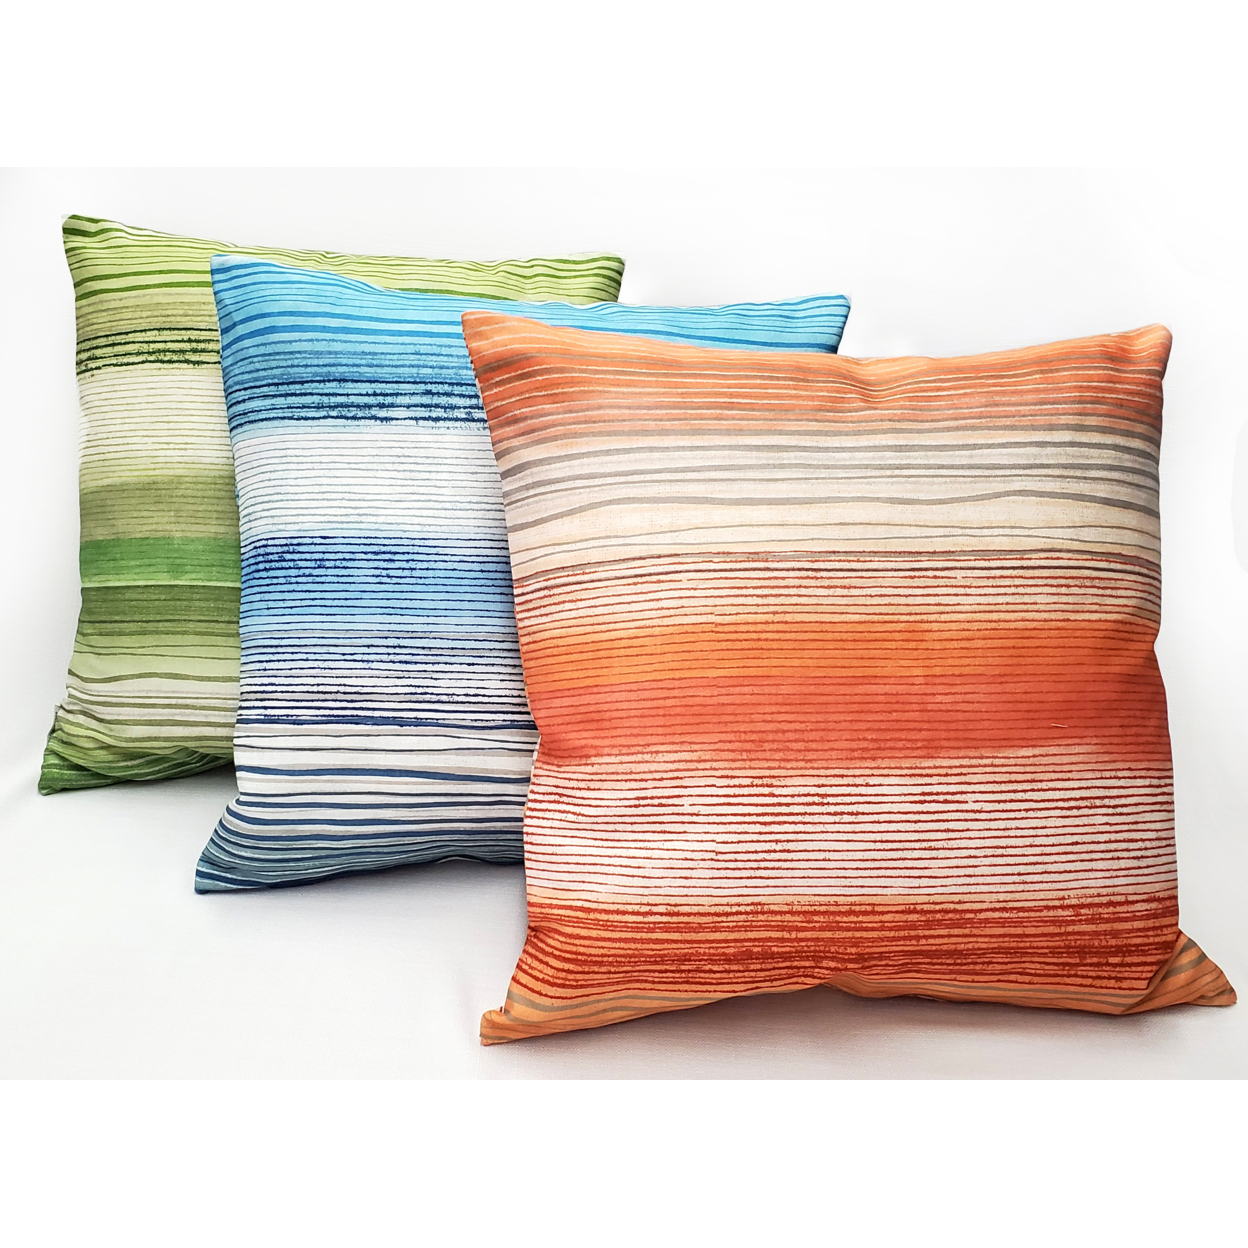 Sedona Stripes Orange Throw Pillow 20x20 Inches Square, Complete Pillow With Polyfill Pillow Insert